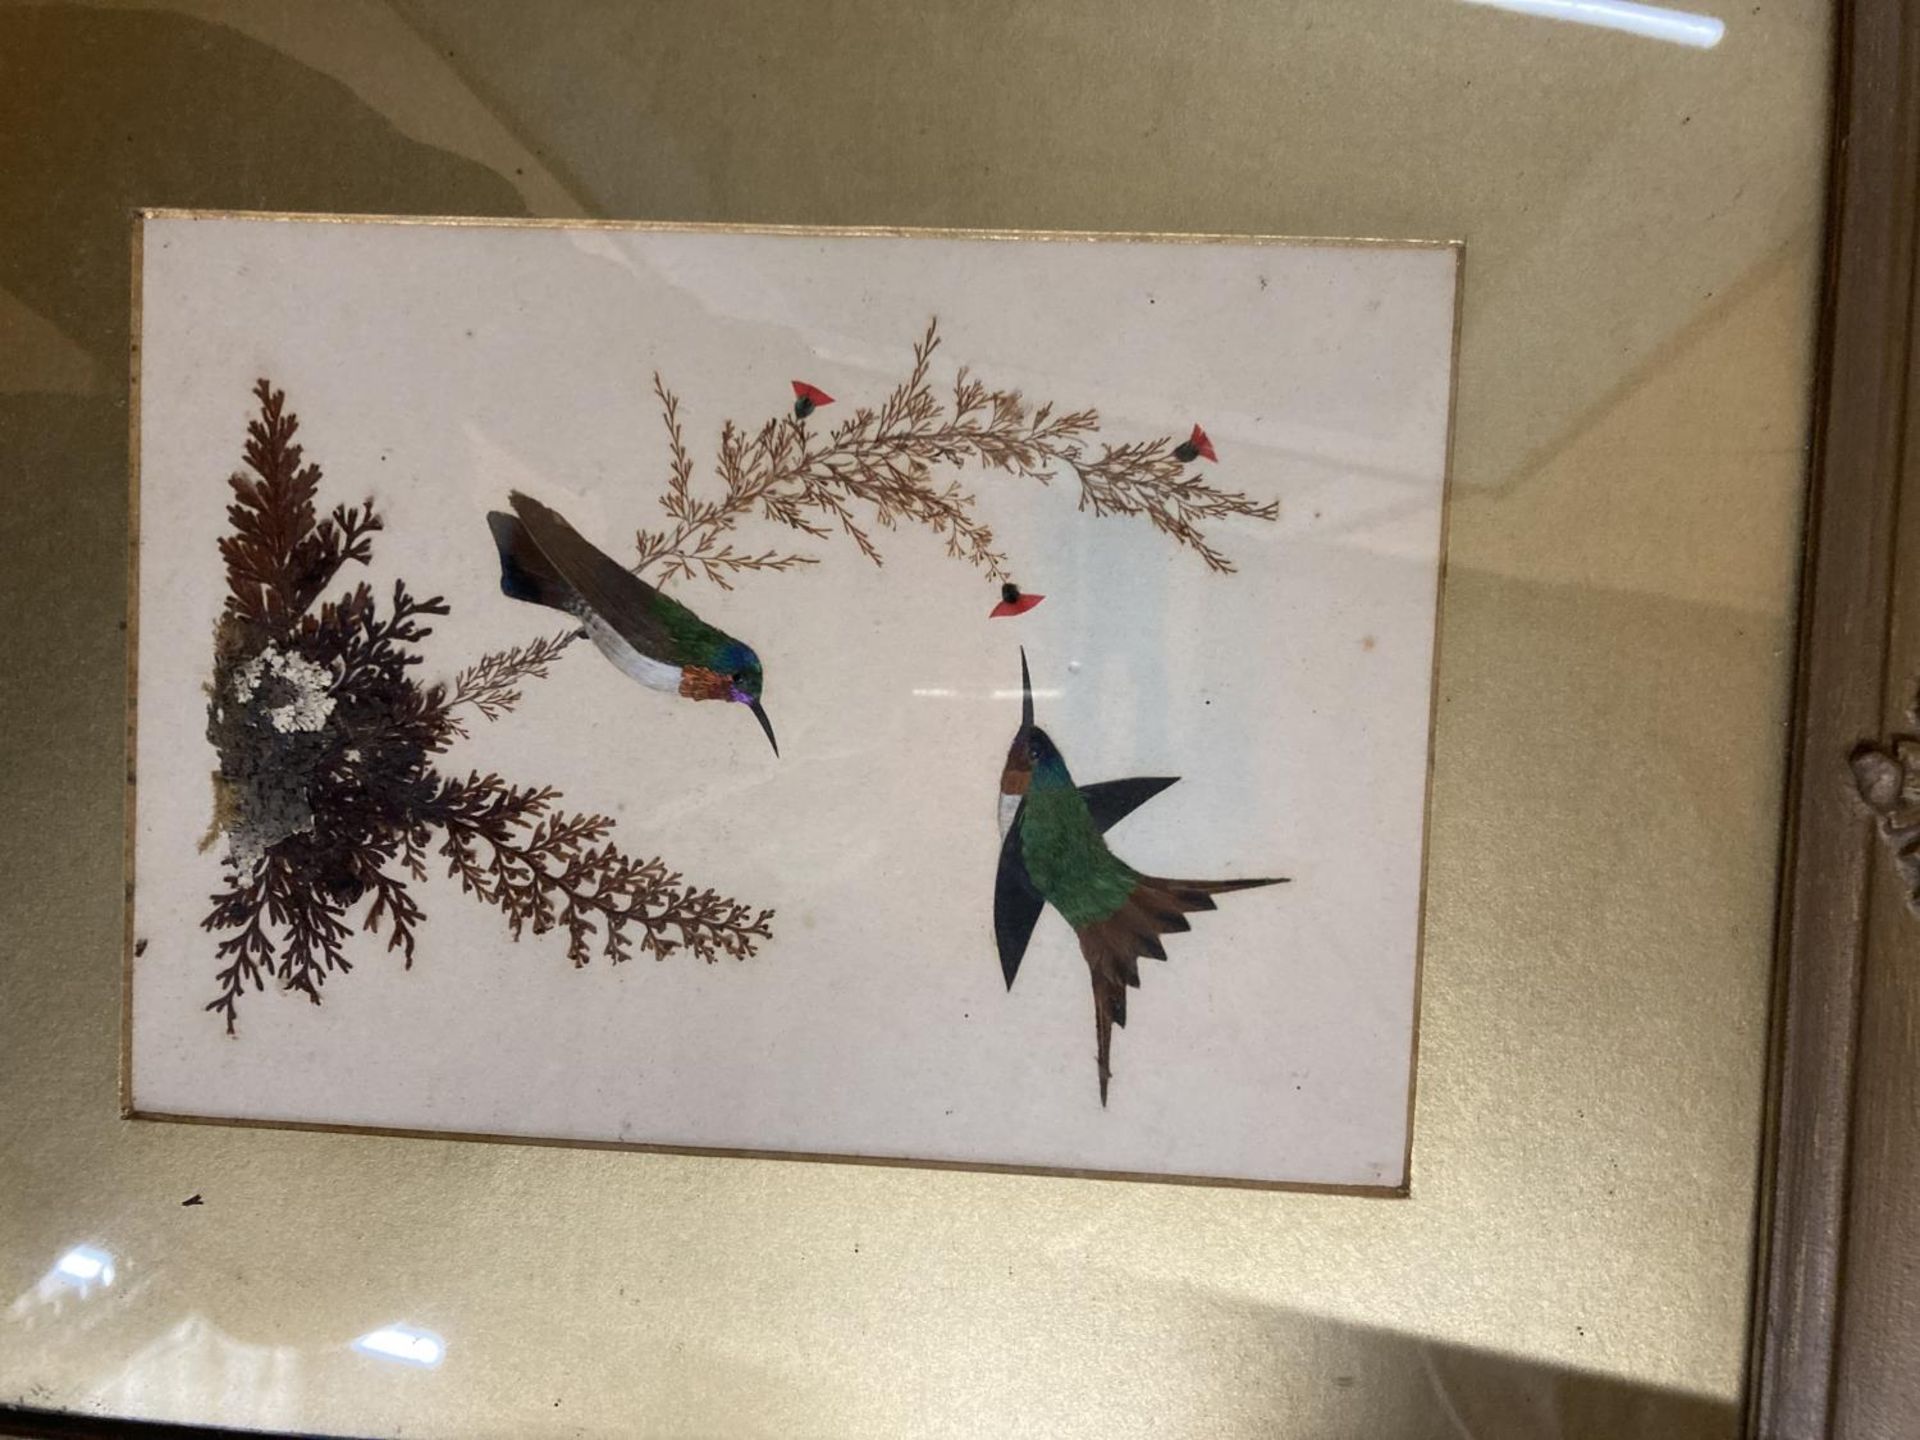 A FRAMED COLLAGE OF BIRDS COMPOSED OF FEATHERS AND PRESSED FOLIAGE 10" X 13" - Image 2 of 5